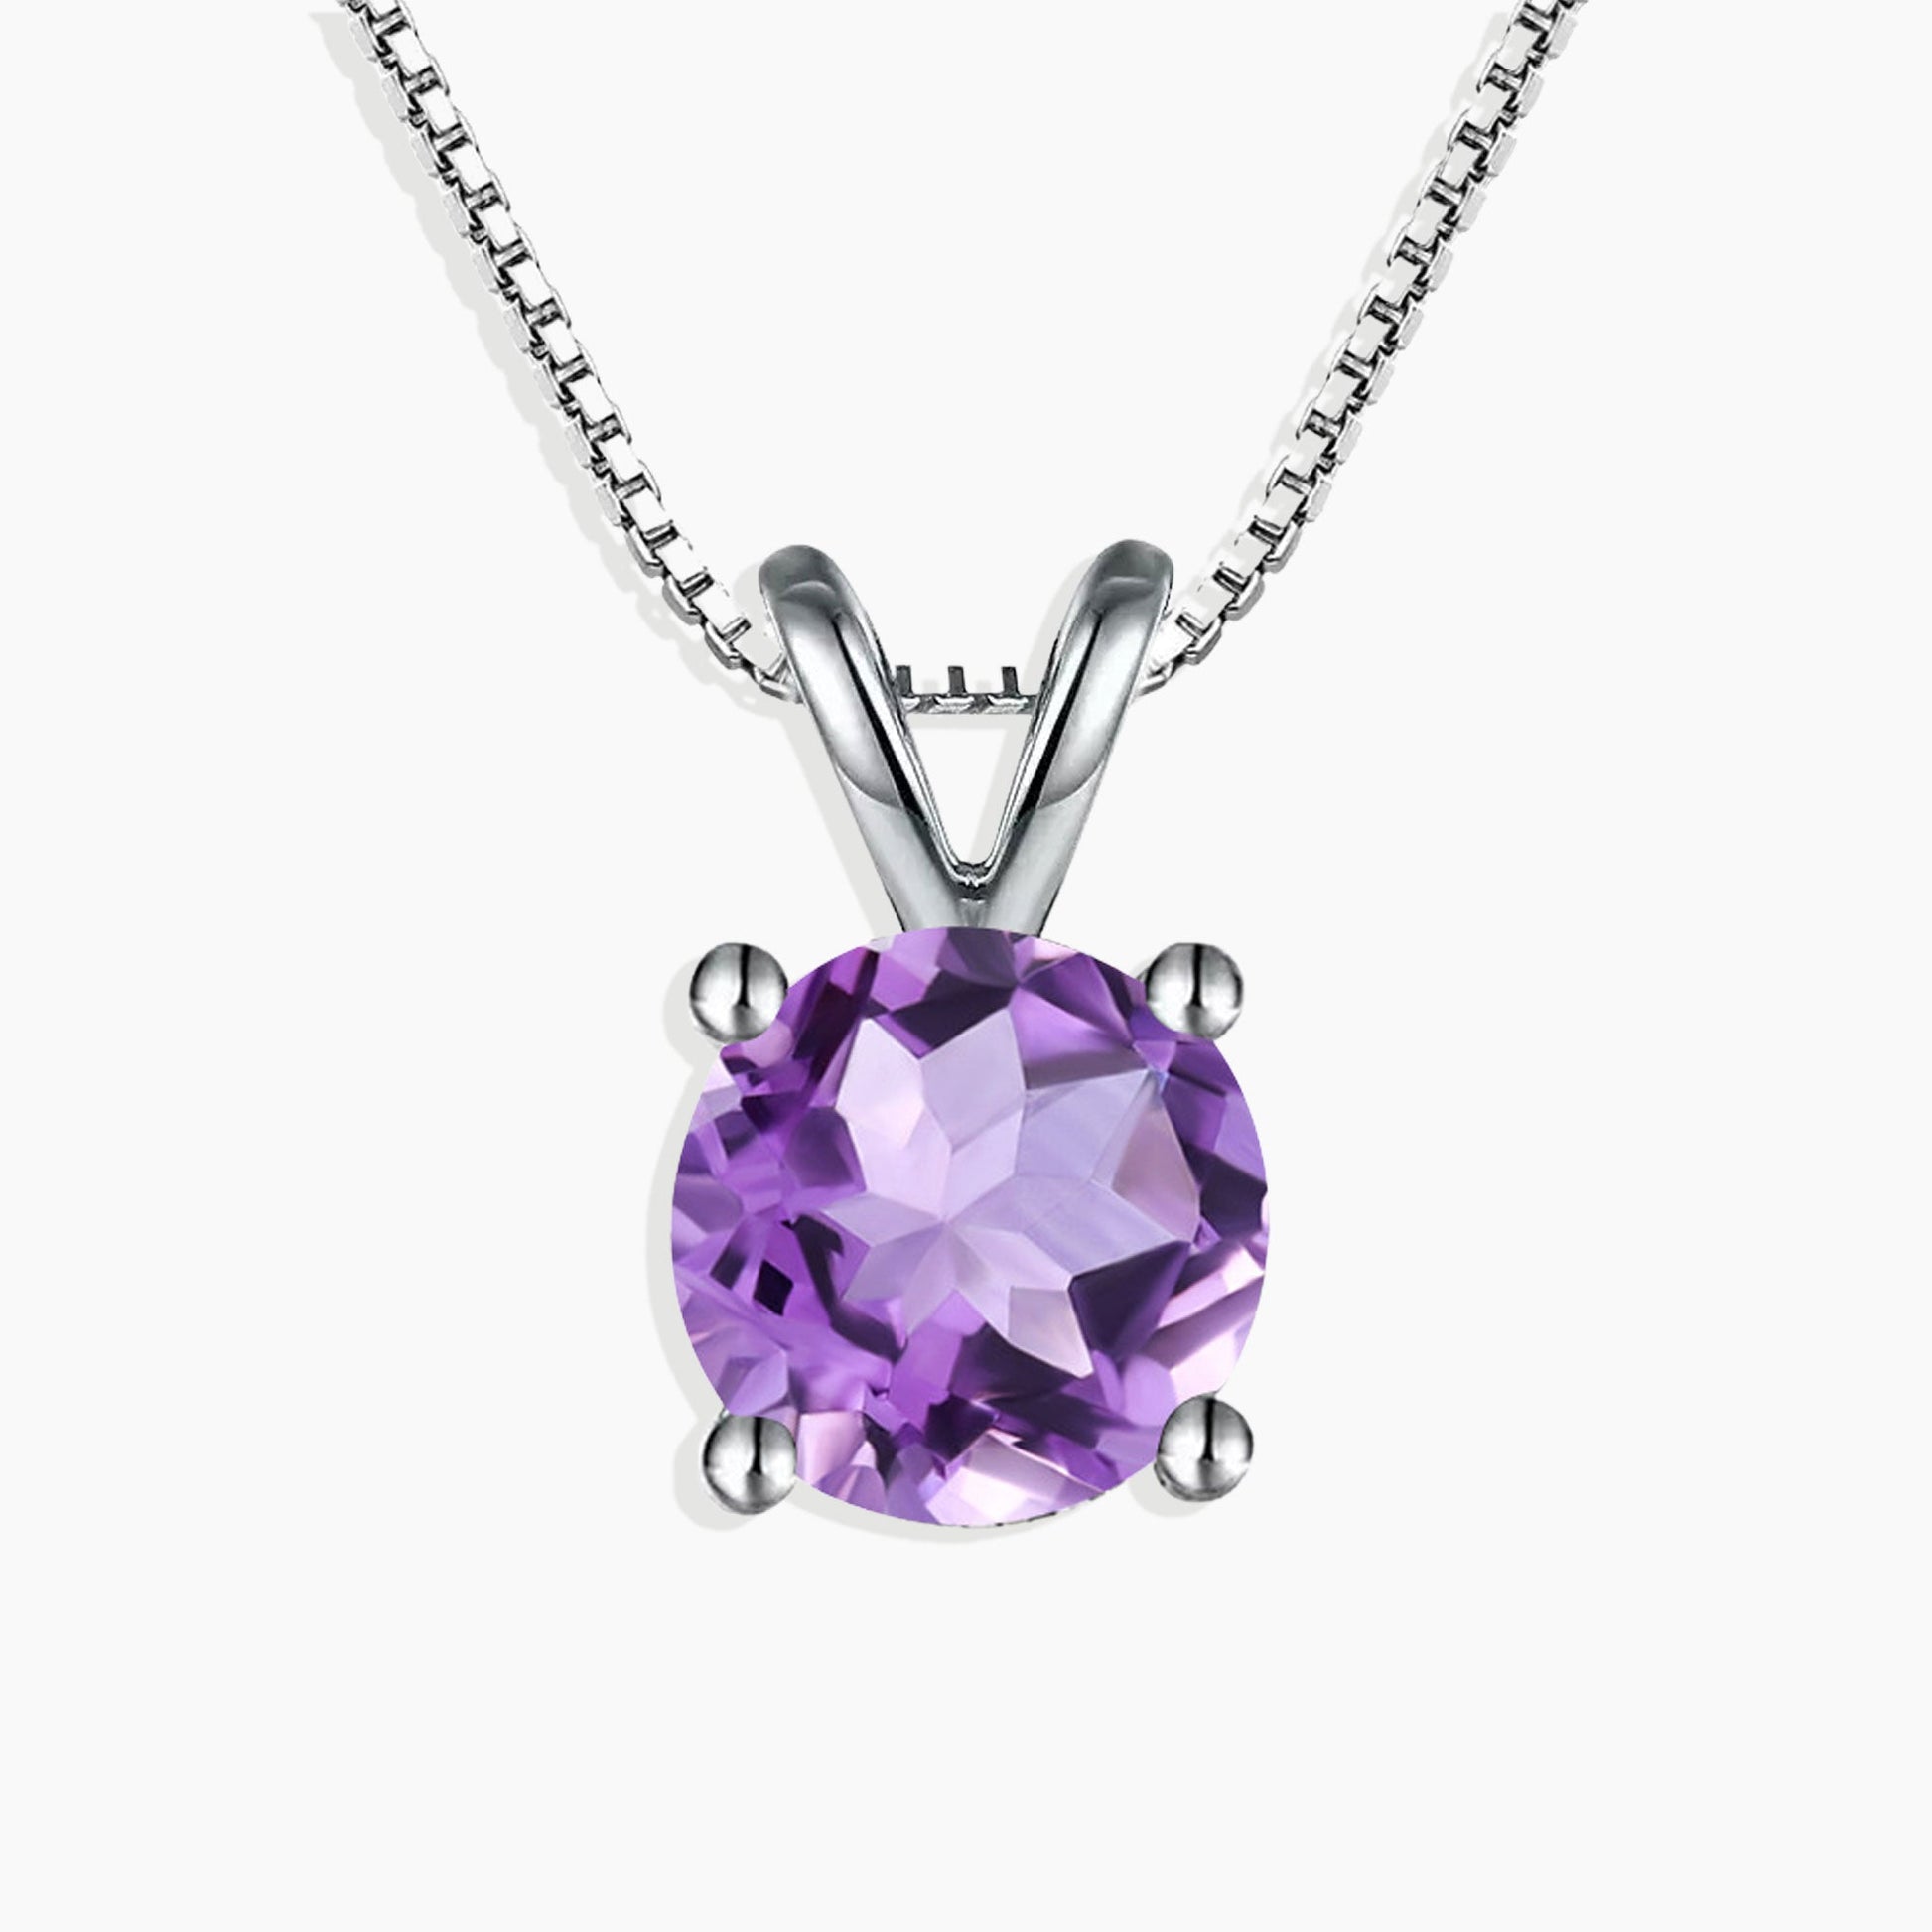 Front view of Round Shape Amethyst Pendant, showcasing a captivating round-cut amethyst stone set in sterling silver.